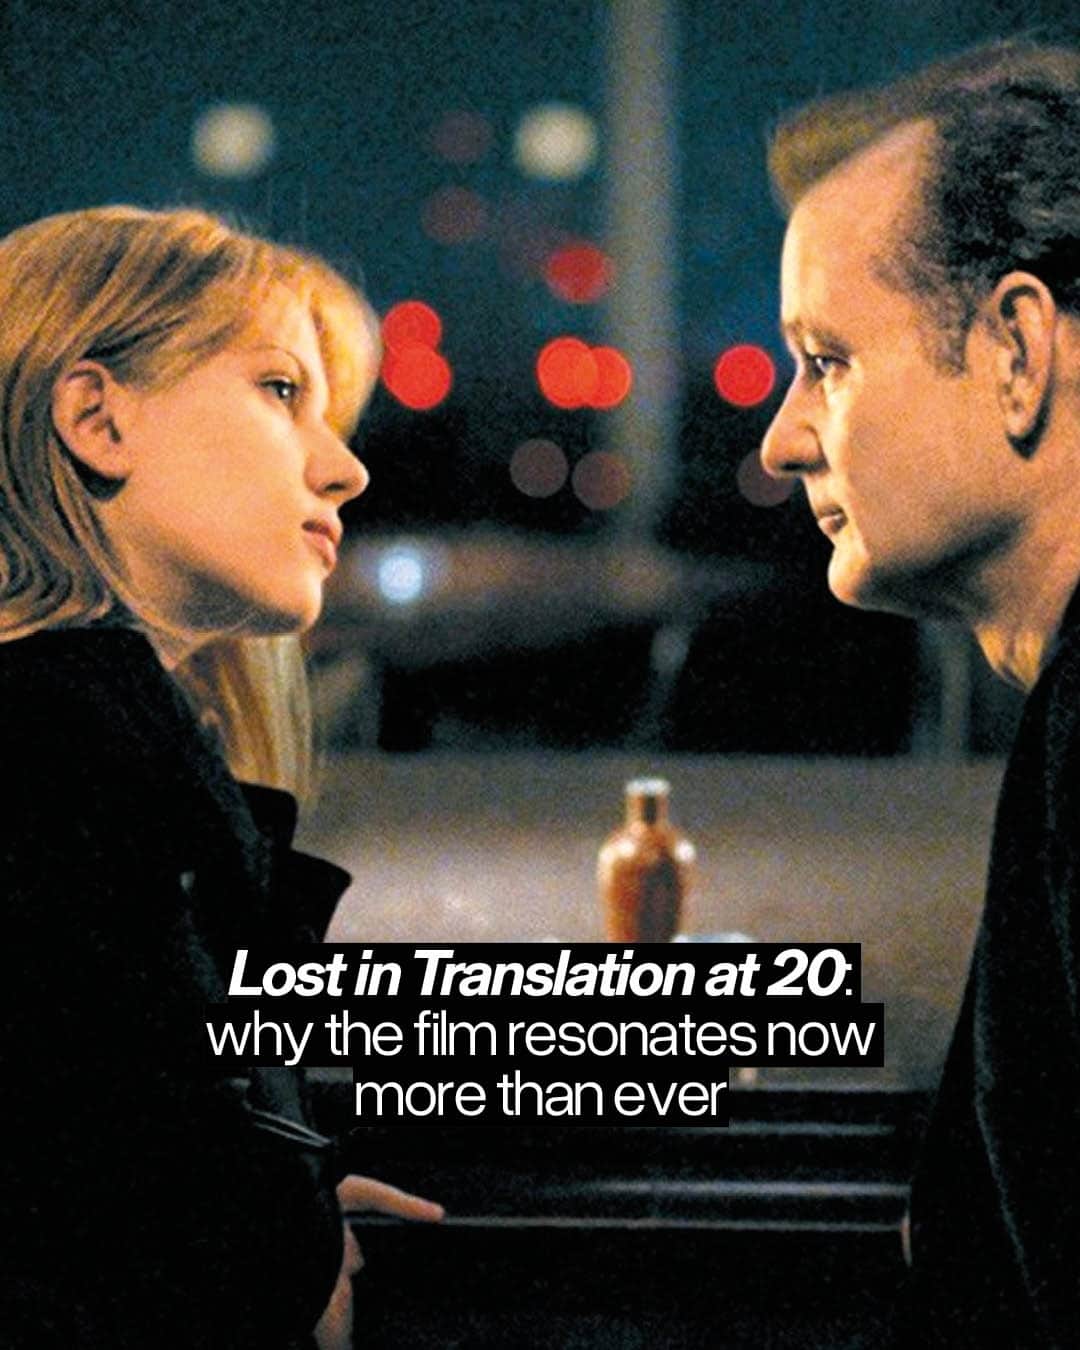 Dazed Magazineのインスタグラム：「What distinguishes @SofiaCoppola’s Lost in Translation from other chronicles of desolation is its timelessness. ⁠ ⁠ Twenty years after its UK release on October 28 2003, the film lives on through grainy TikTok edits and fan-made Etsy posters, the majority of which feature Johansson’s iconic pink wig and her famous line “I just don’t know what I’m supposed to be.” In the comments section of one particular TikTok post, legions of Gen Z girls have commented “I am her”.⁠ ⁠ This may be surprising to some, as Charlotte herself does not exactly give off the most ‘relatable’ vibes: she’s a Yale grad, doesn’t appear worried about money, and is staying at a luxury hotel in Japan. This isn’t something that has escaped Coppola’s notice. ⁠ ⁠ “I was so surprised so many people connected to it. I thought: ‘Who cares about a privileged young woman who doesn’t know what she’s doing with her life?’”, she said in a recent article. “But the ultimate thing it was about, to me, was a connection. And I think we’re all looking for this. It was about unexpected moments of connection.” ⁠ ⁠ Read more through the link in our bio 🔗⁠ ⁠ 📷 Lost In Translation (2003)⁠ ✍️ Isabella Guarnieri⁠」